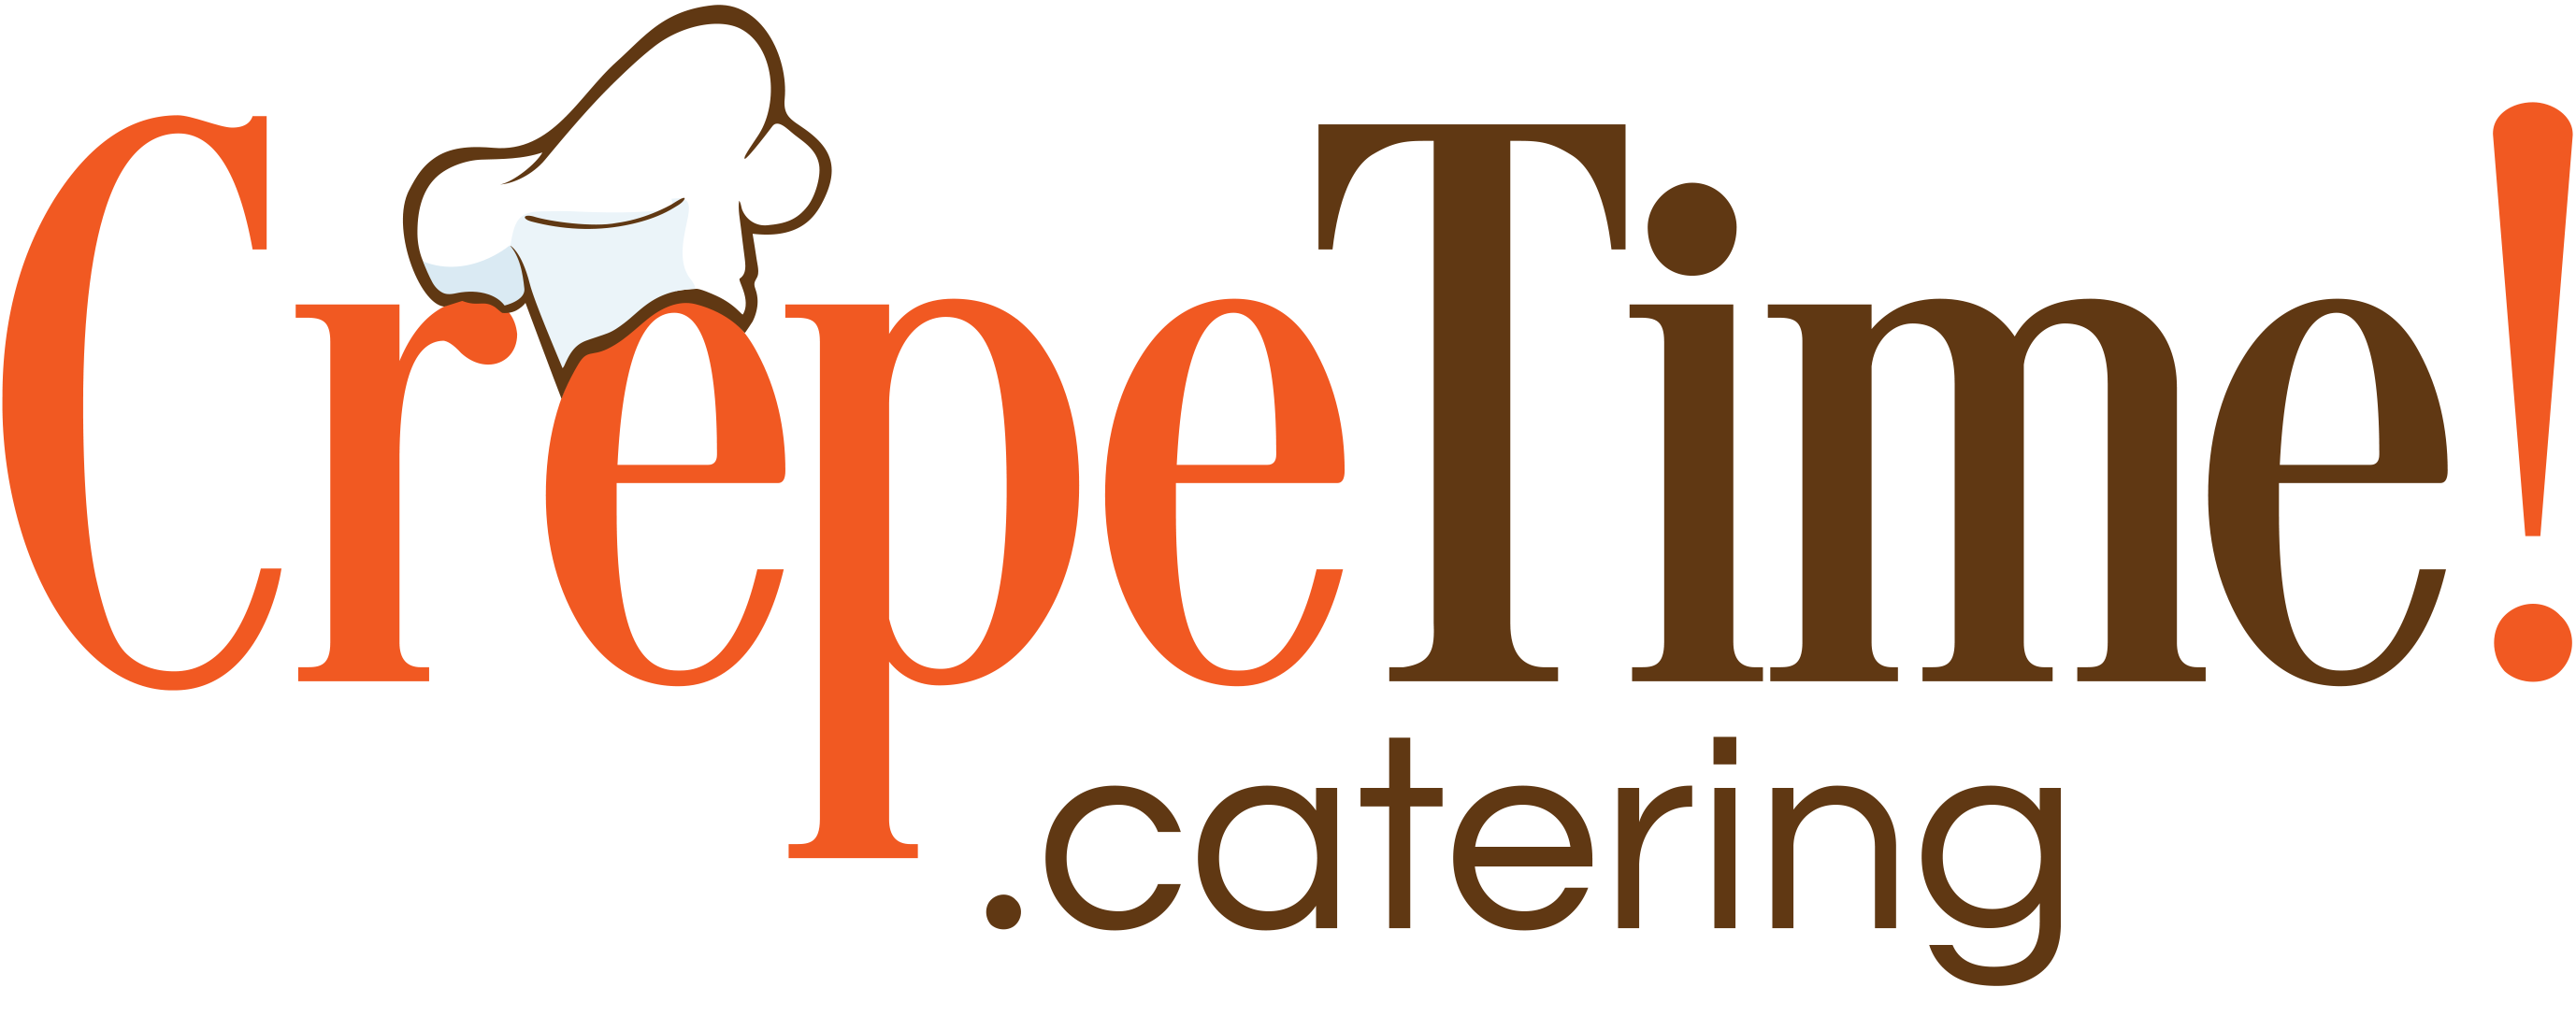 CrepeTime Catering Home